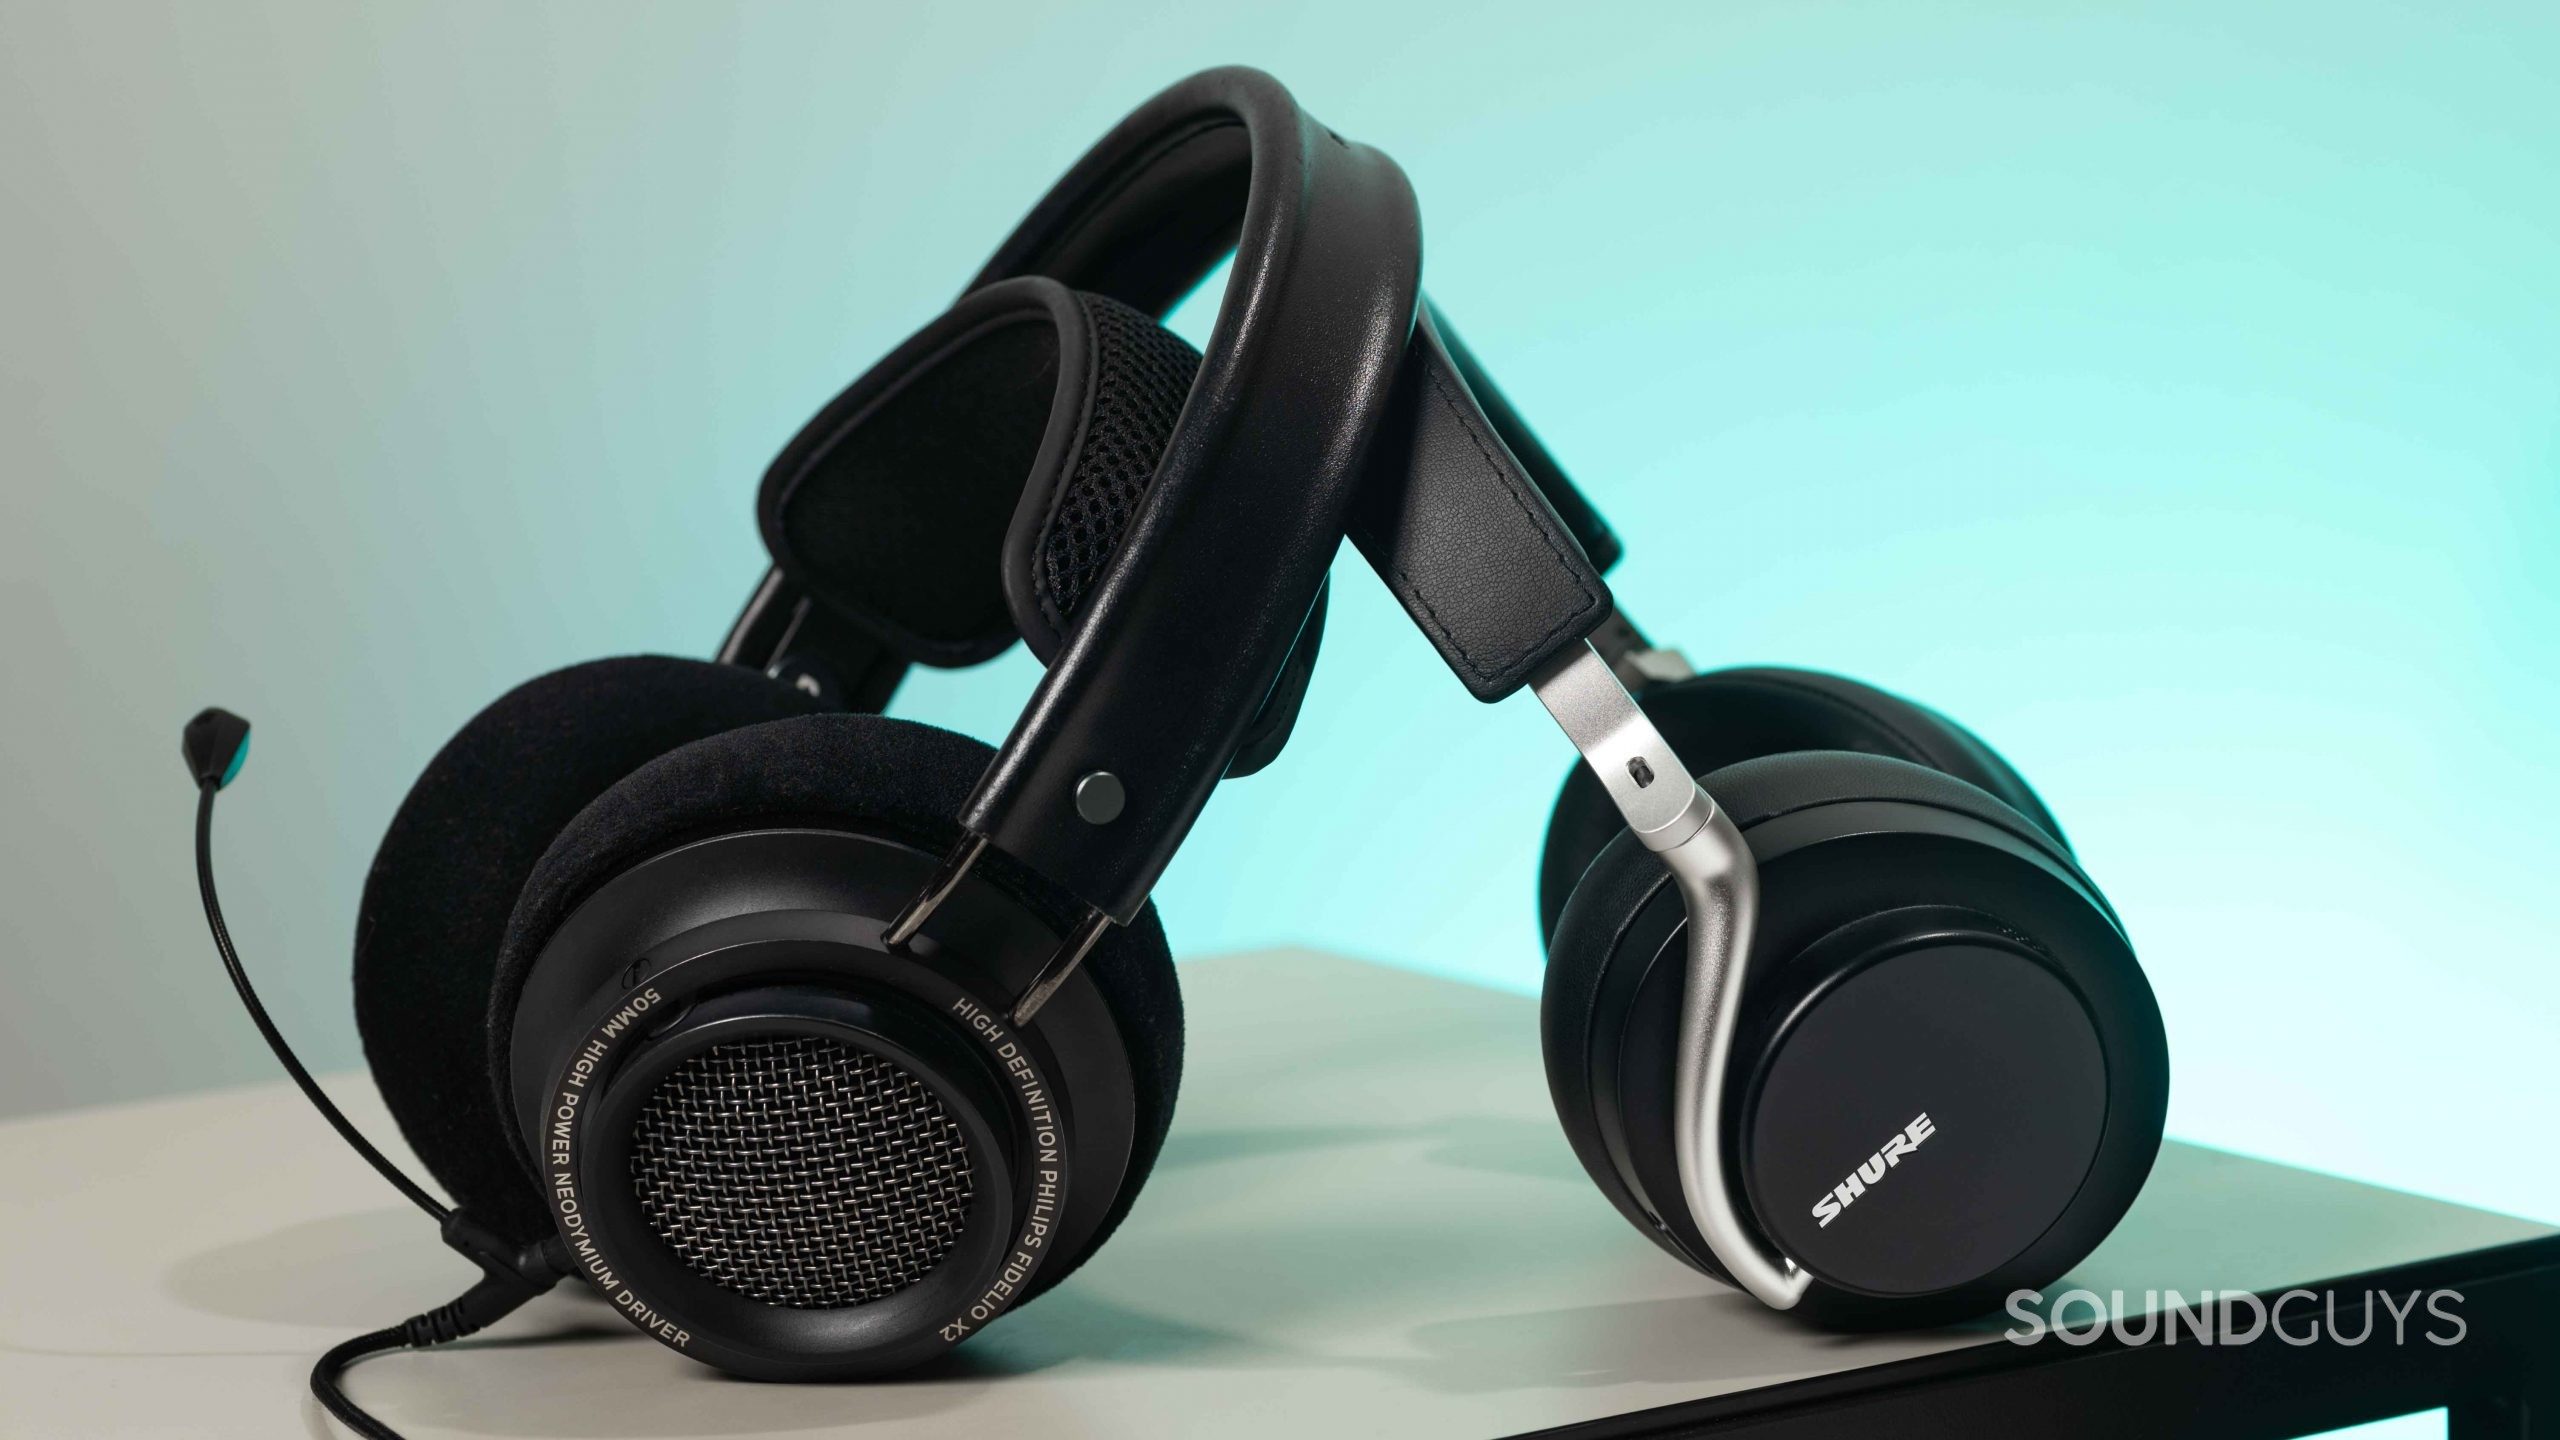 The Philips Fidelio X2 open-back headphones lean against the Shure AONIC 50 Bluetooth headphones with noise canceling.